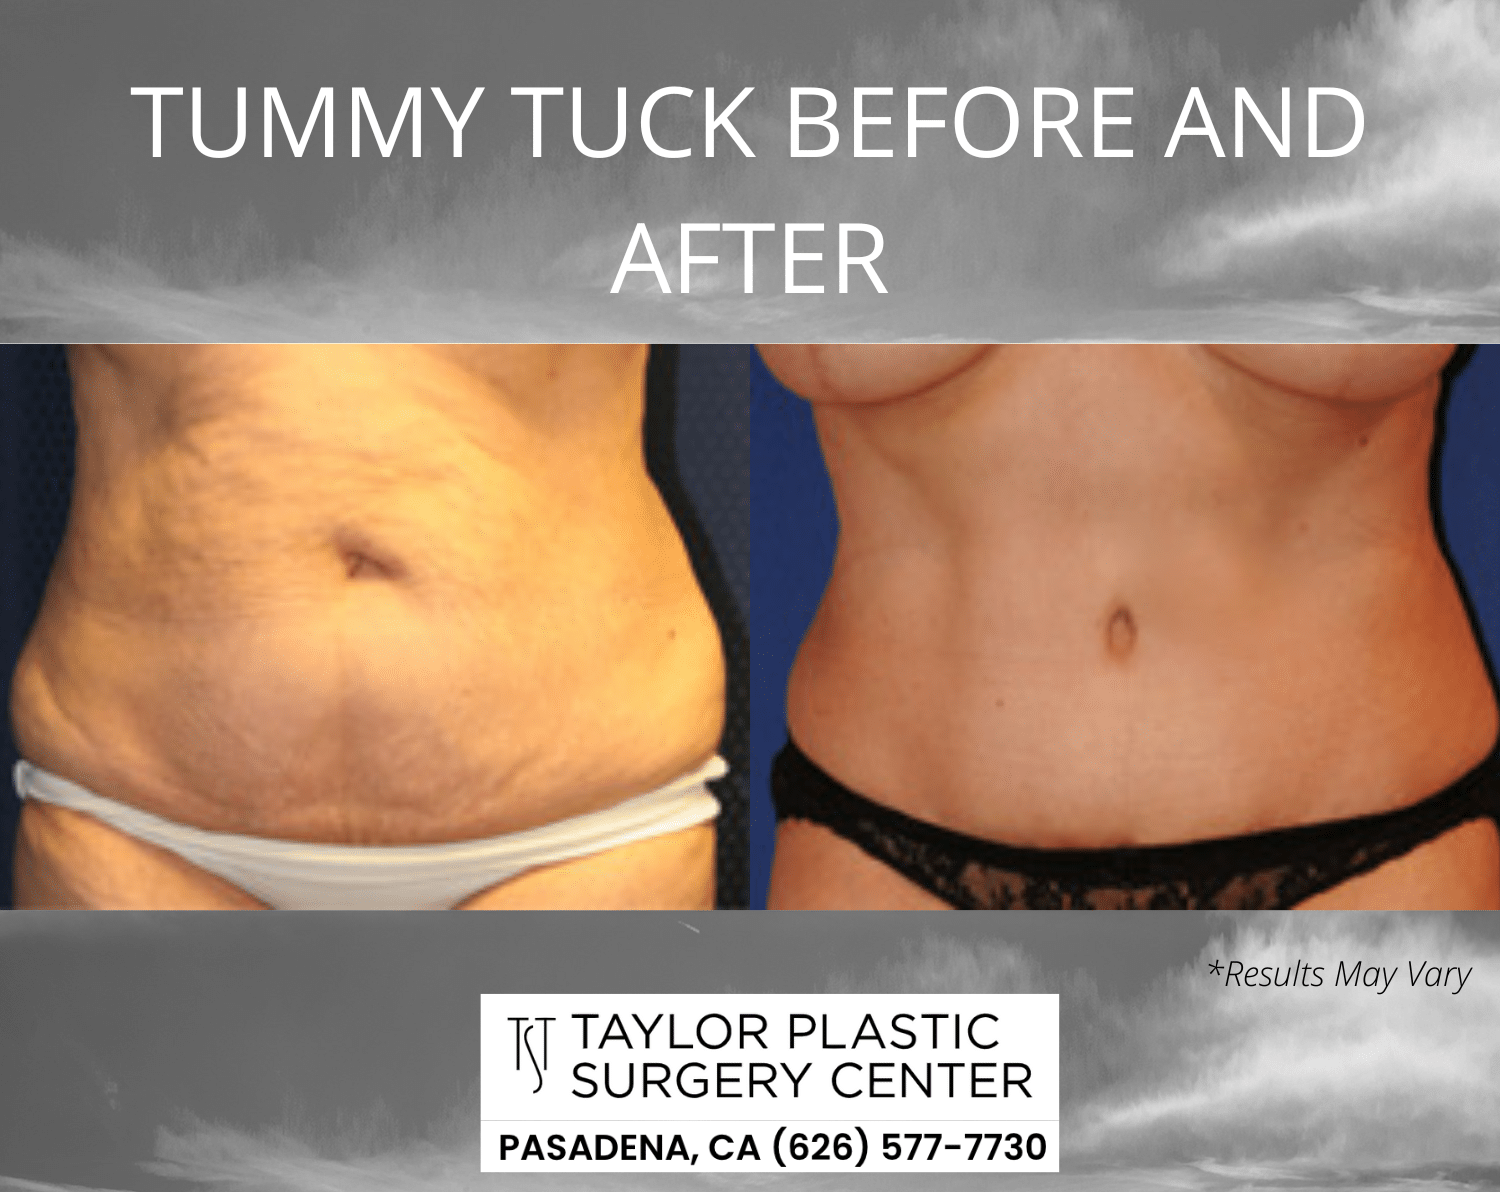 Why Should I Consider a Tummy Tuck After Pregnancy? - Thomas Taylor, M.D.